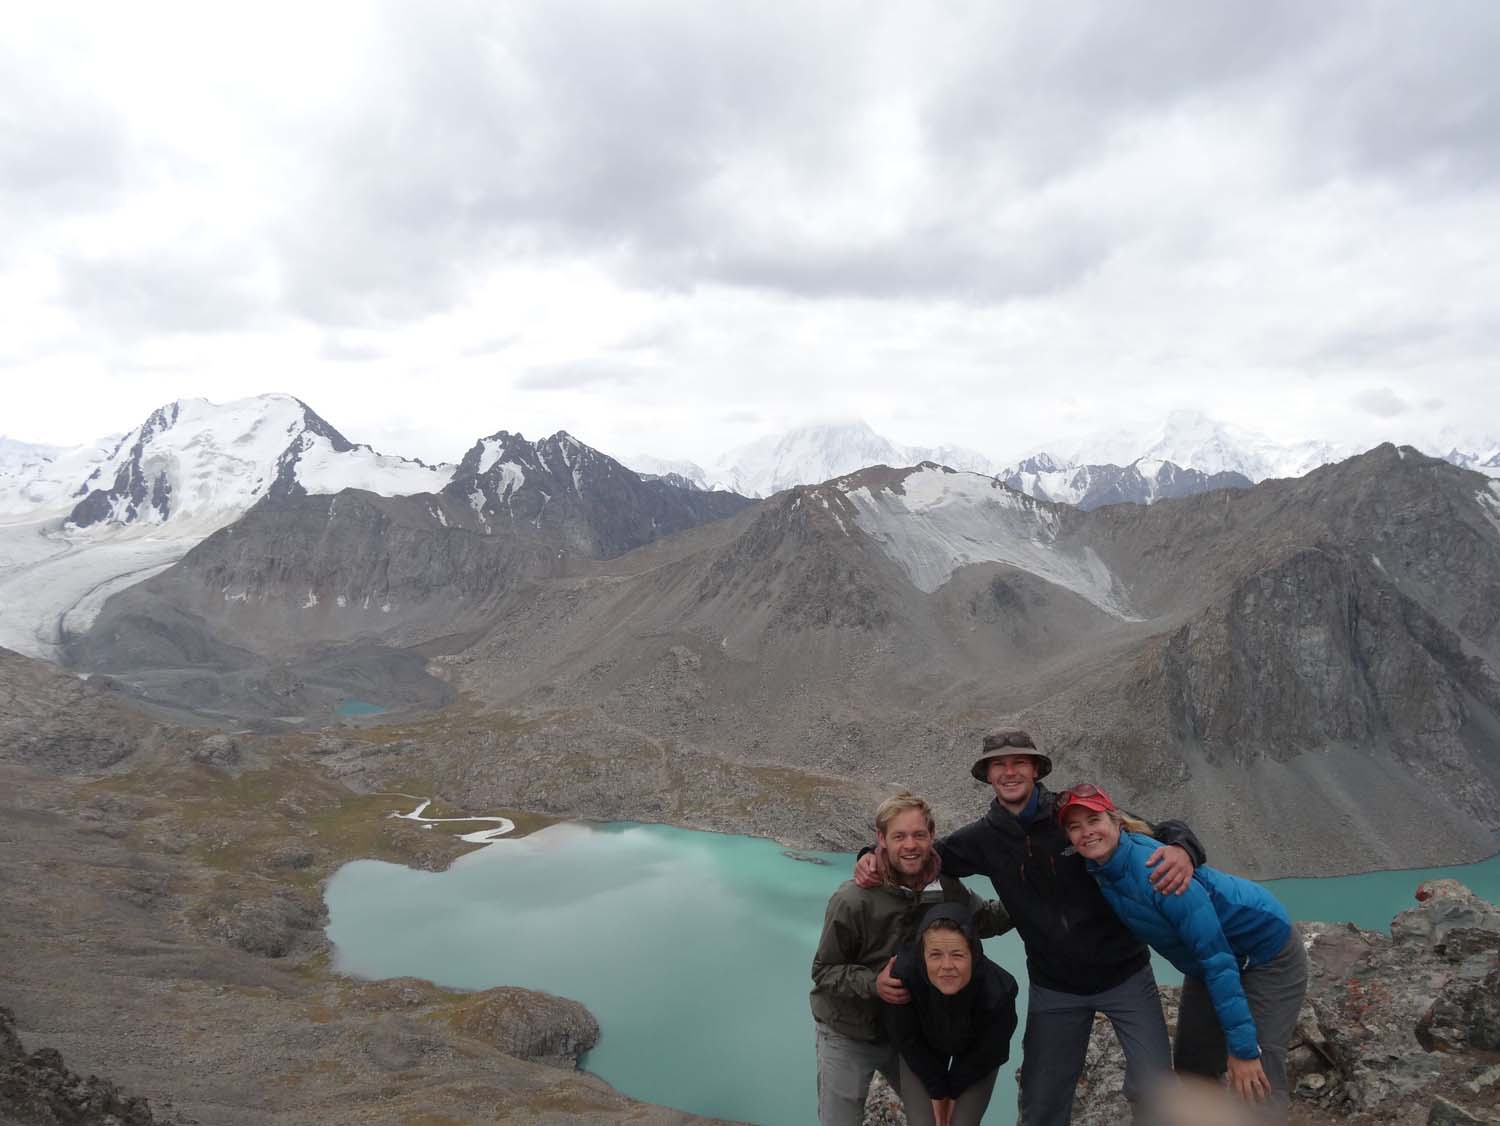 Onno, Tamar, Jon and Jude at the top of the pass, just before it started snowing